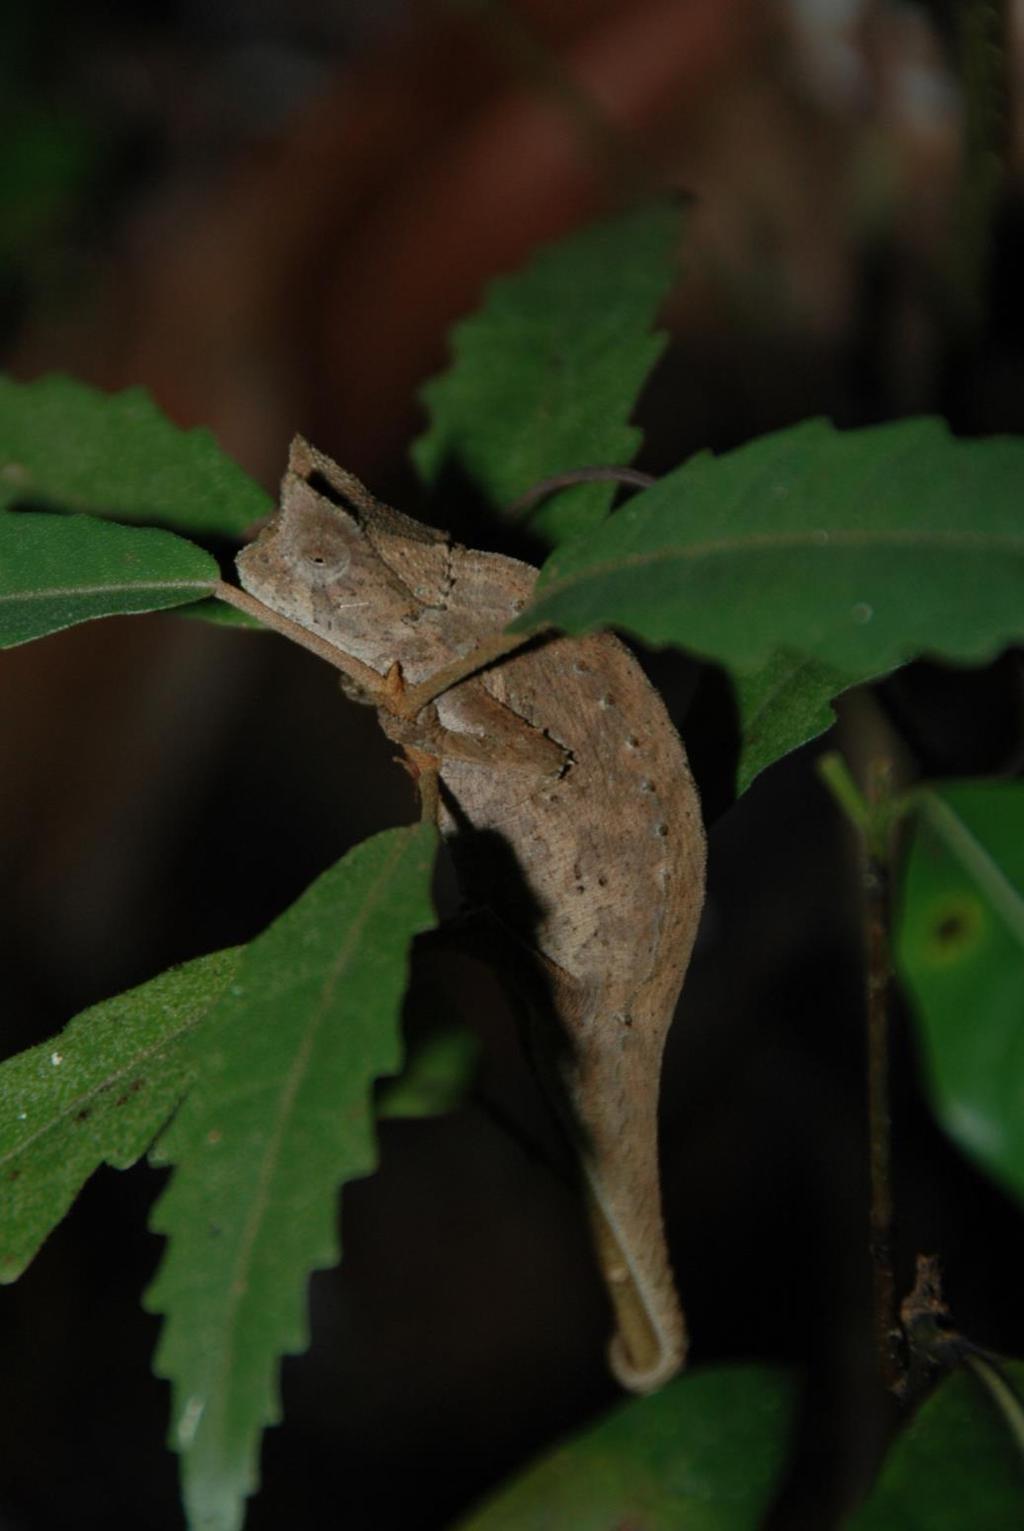 MADAGASCAR Figure 2. Brookesia chameleons Madagascar is the main centre of diversity for chameleons and half of all species are endemic to the island.